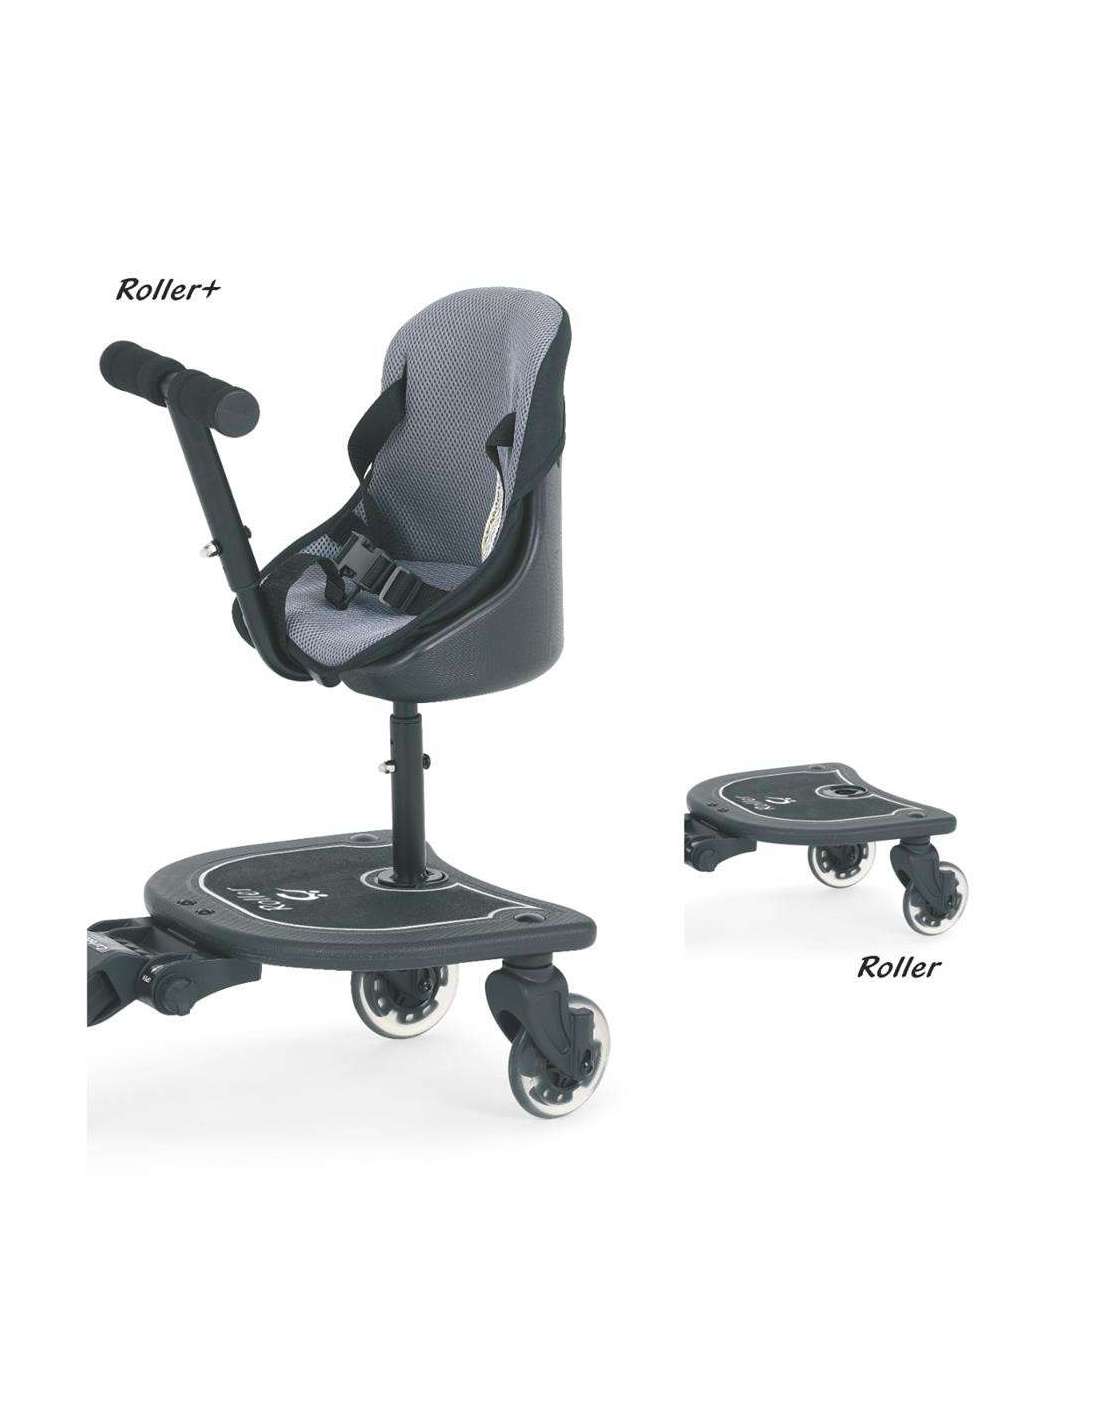 PATINETE UNIVERSAL ROLLER + ASIENTO CARBEBÉ